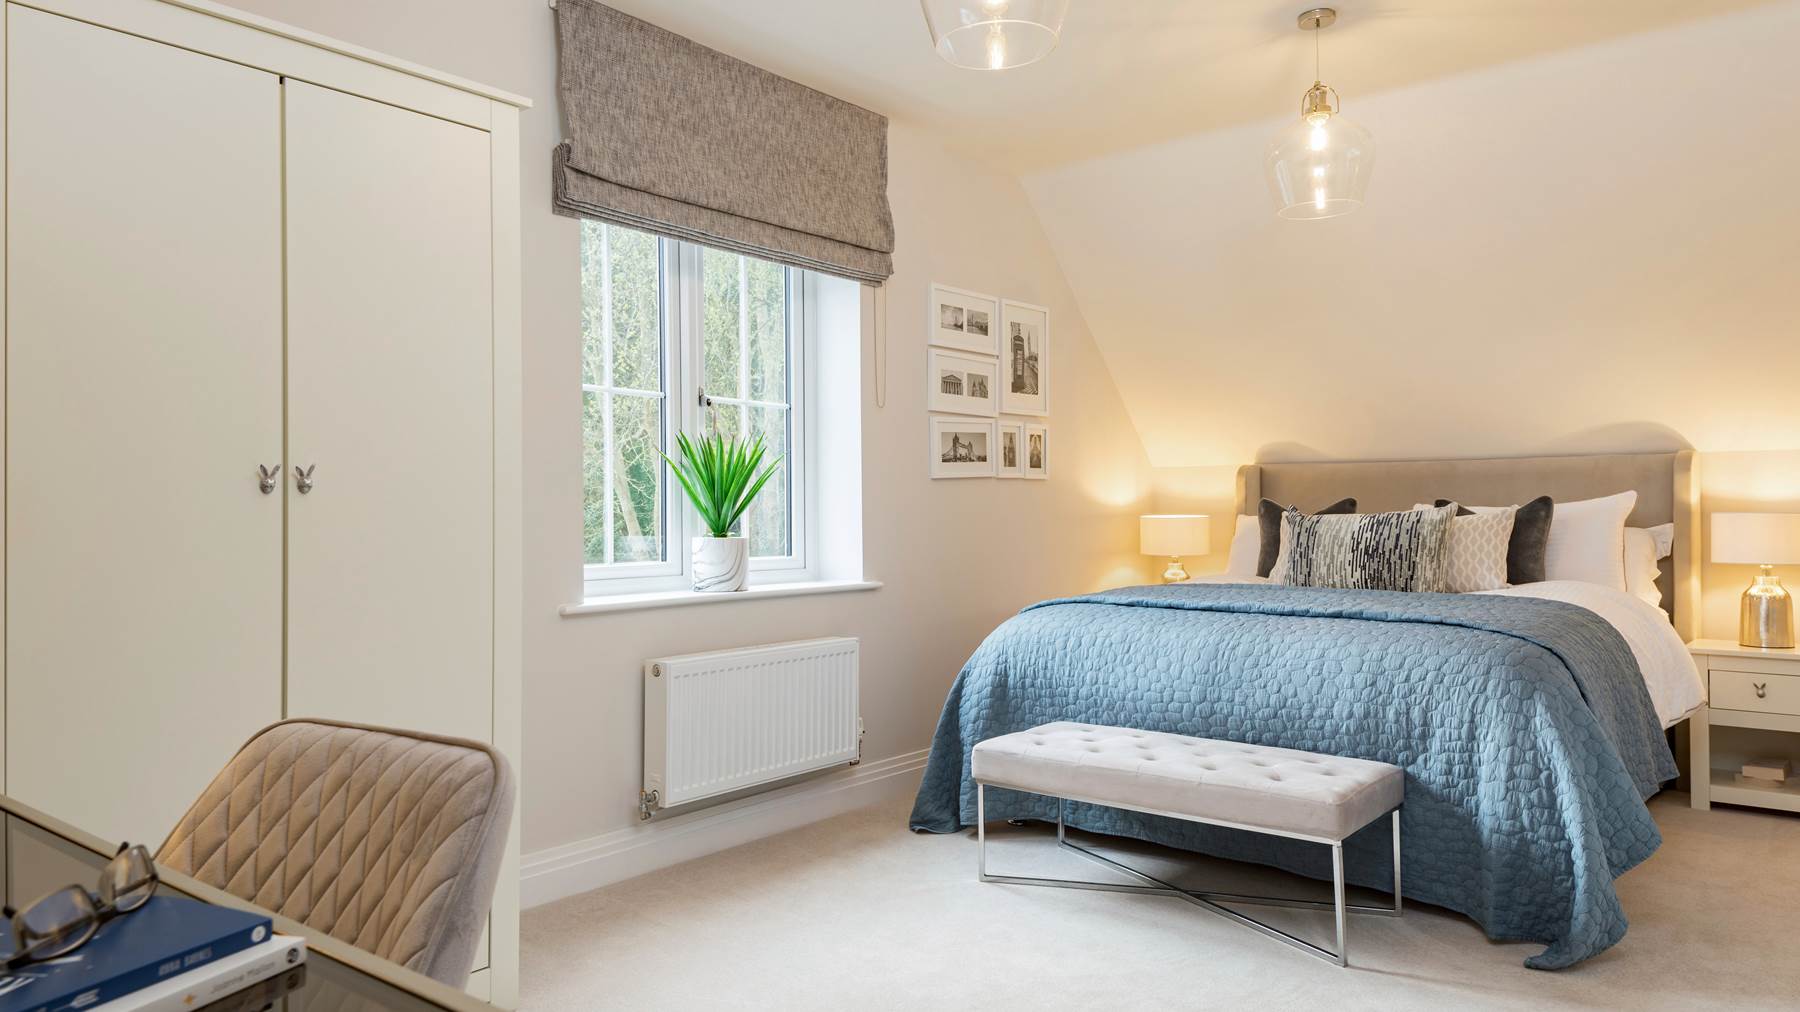 Bedroom of house for sale in Alton, Hampshire